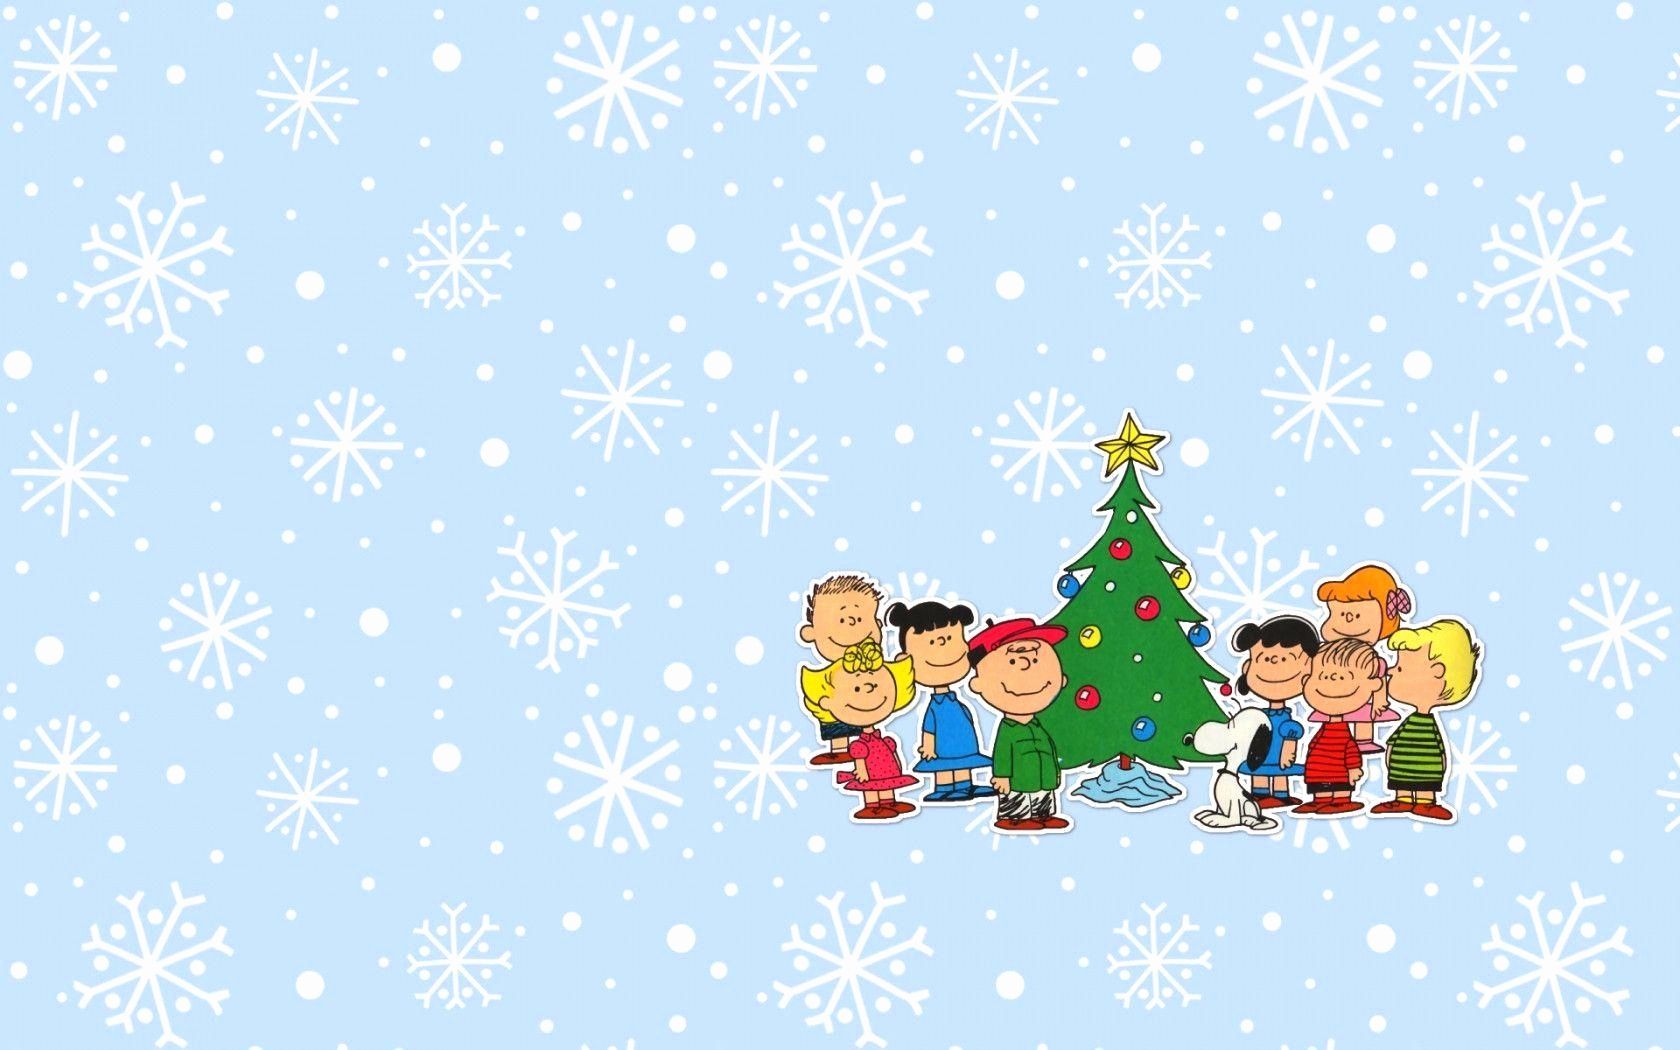 Snoopy Christmas Wallpaper Best Of Snoopy Christmas Background Desktop Background Ideas of The Hudson